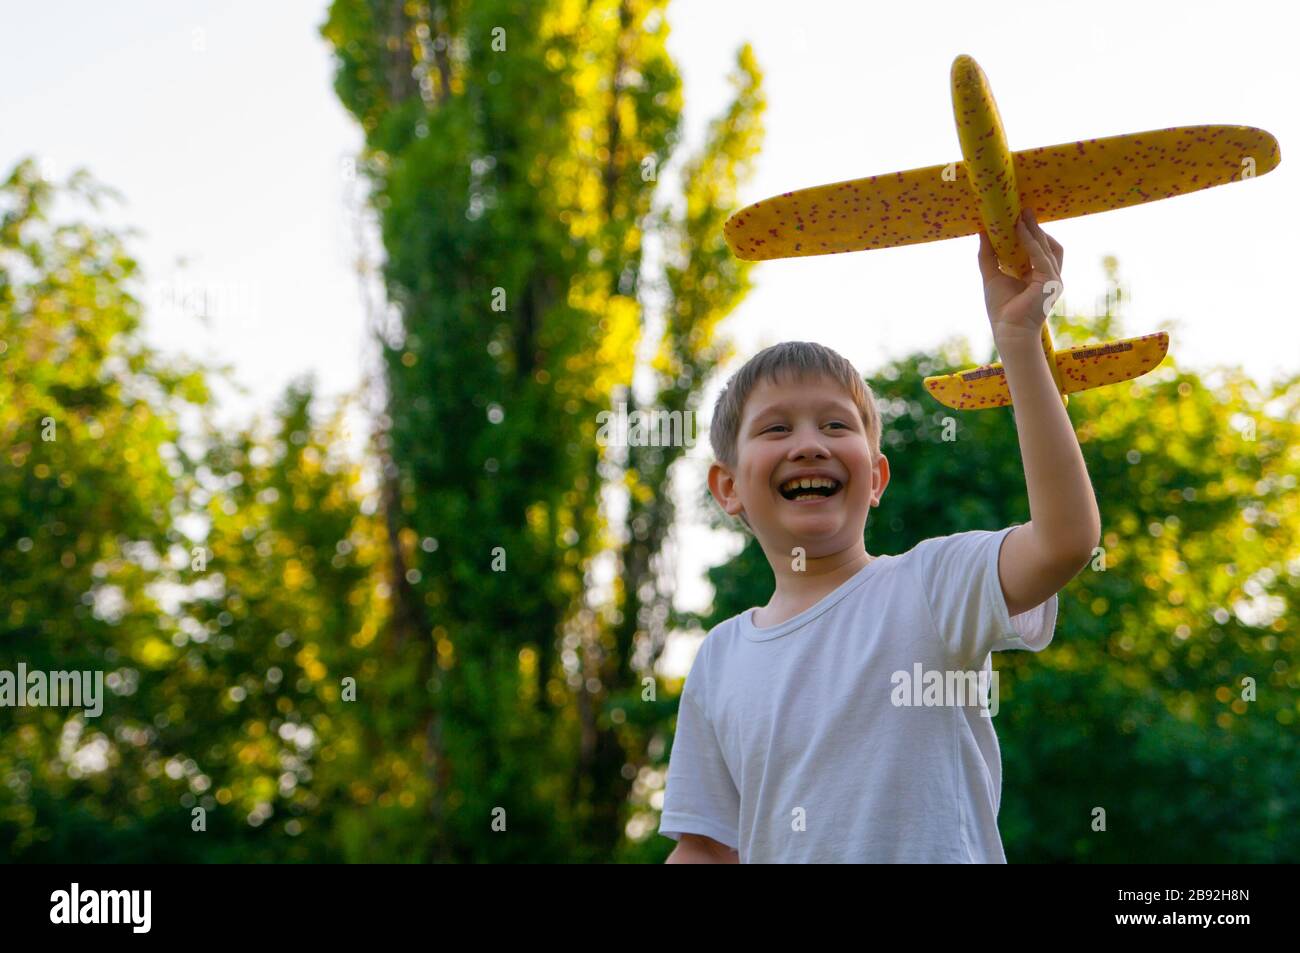 Young boy launches toy glider at sunset. Soft background. Stock Photo